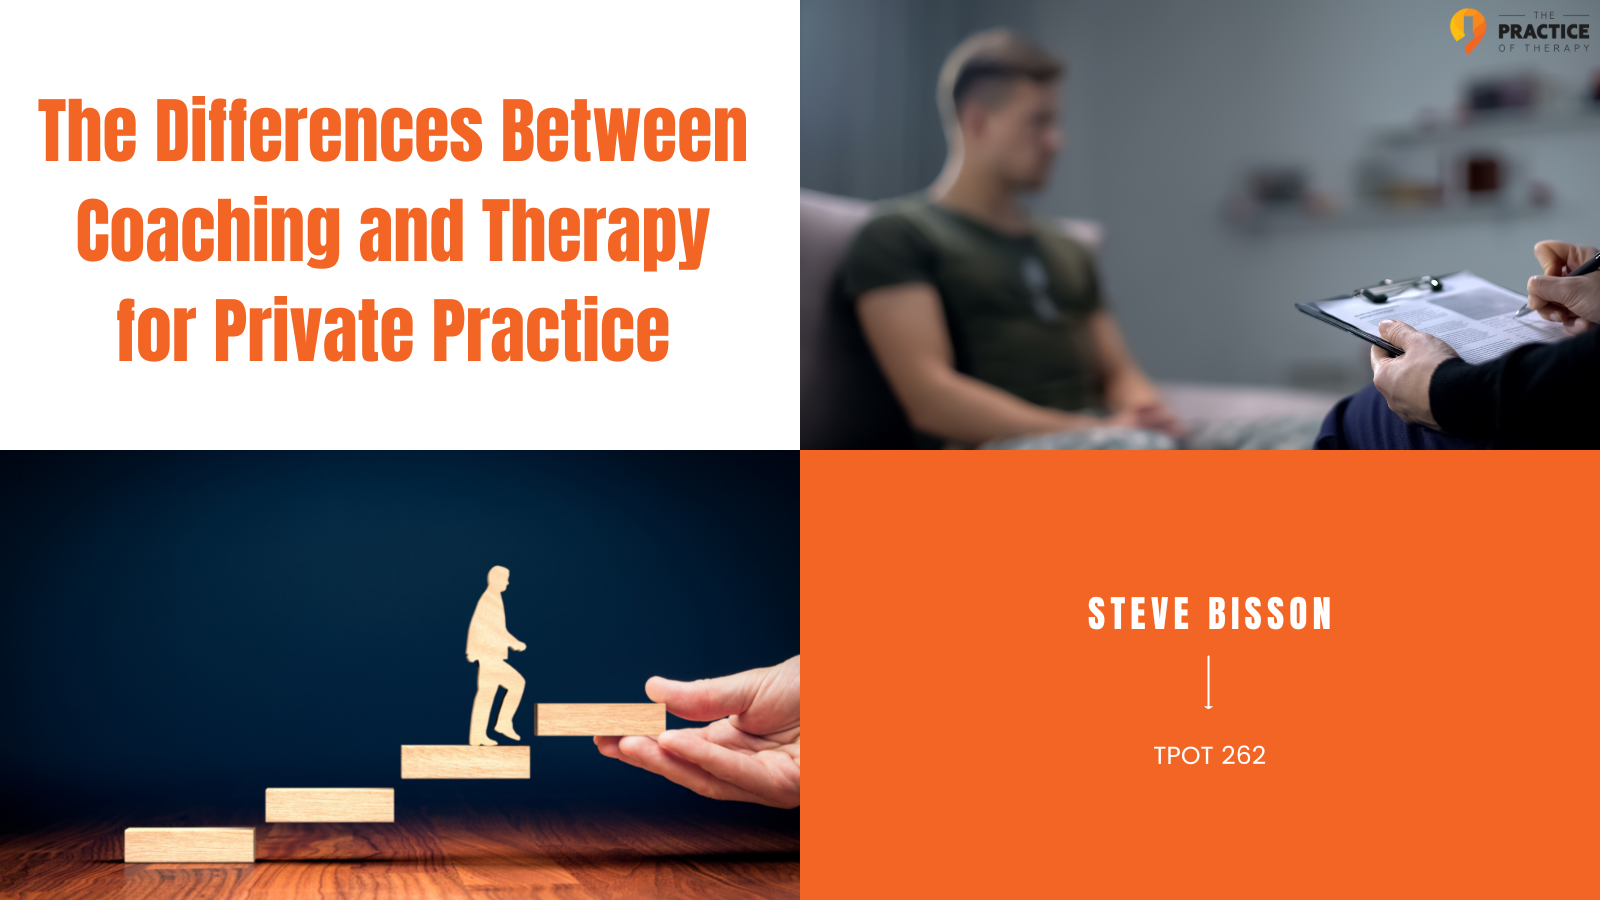 Steve Bisson The Differences Between Coaching and Therapy for Private Practice TPOT 262